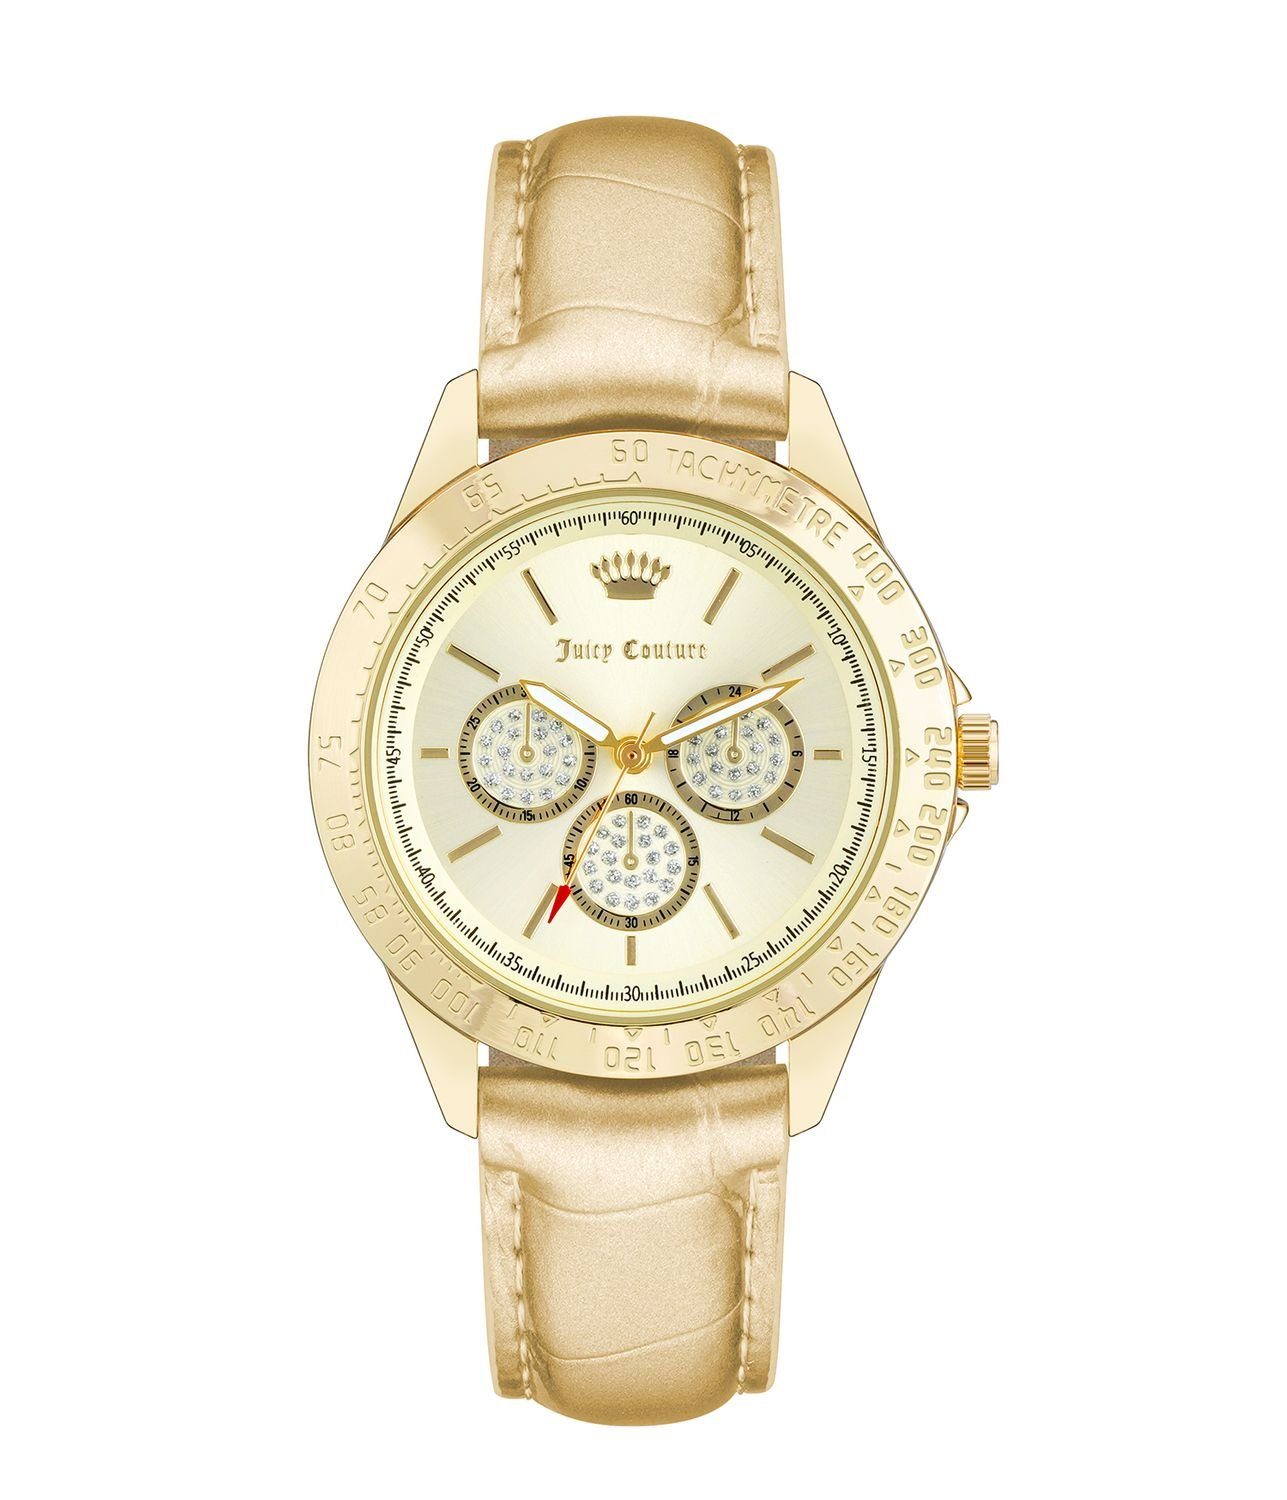 JC/1220GPGD Digitaluhr Juicy Couture